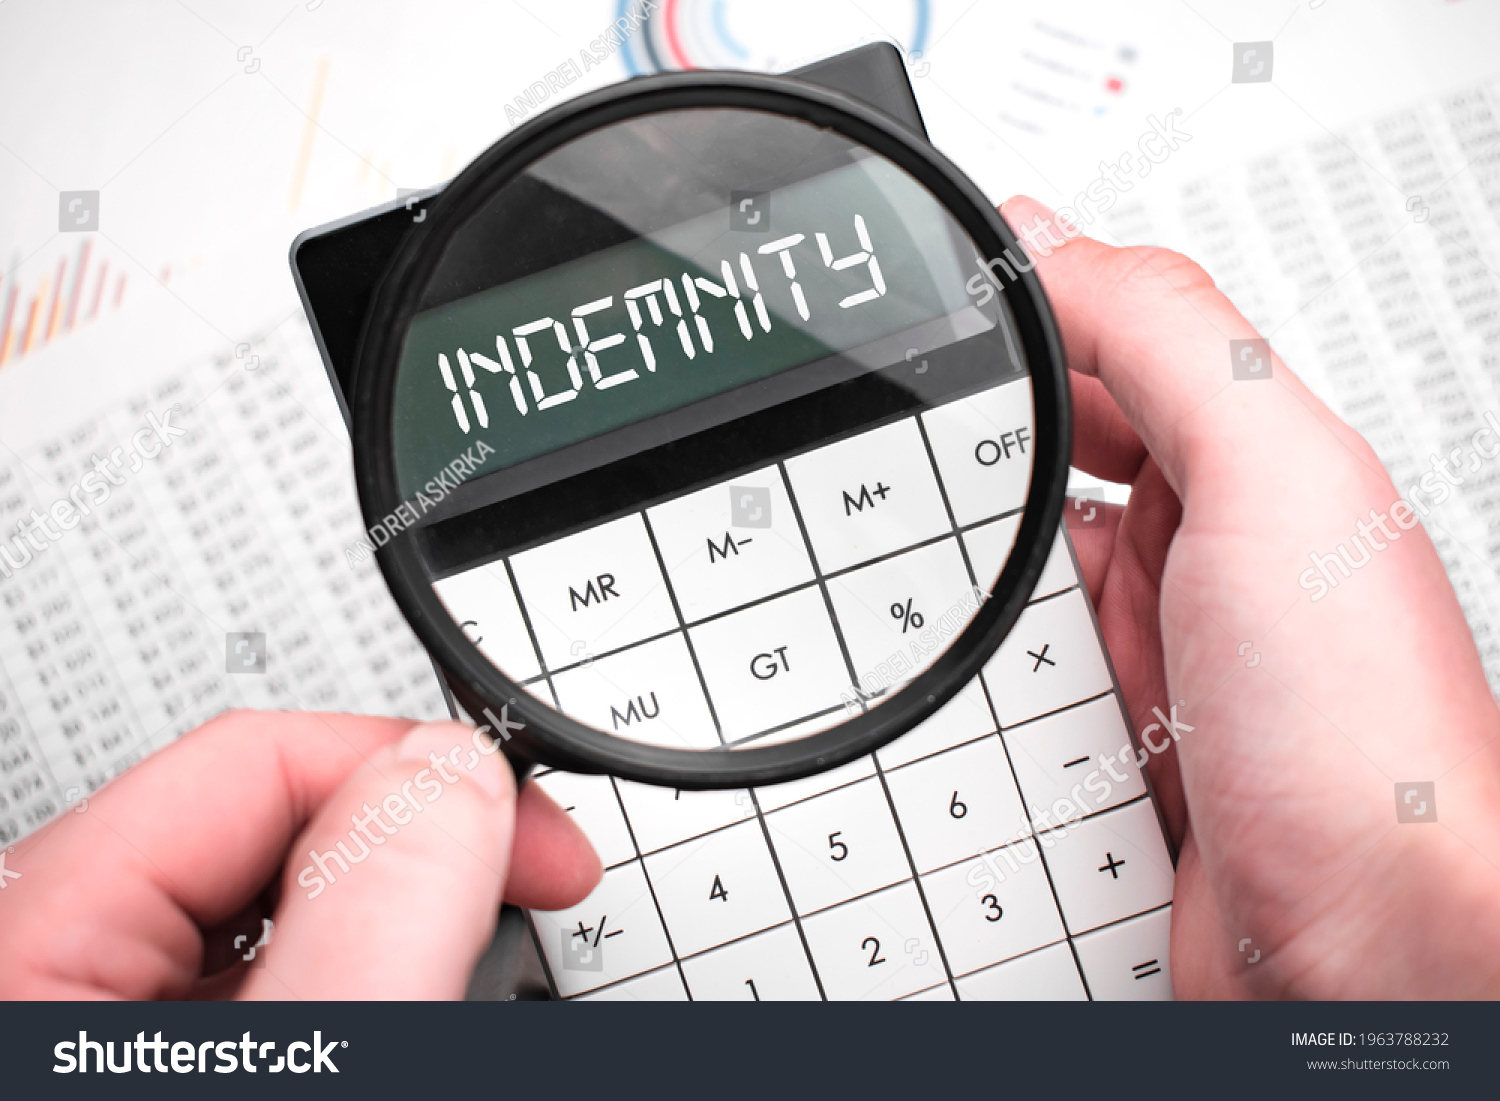 The word indemnity is written on the calculator. Business man holding a calculator in his hand. #1963788232